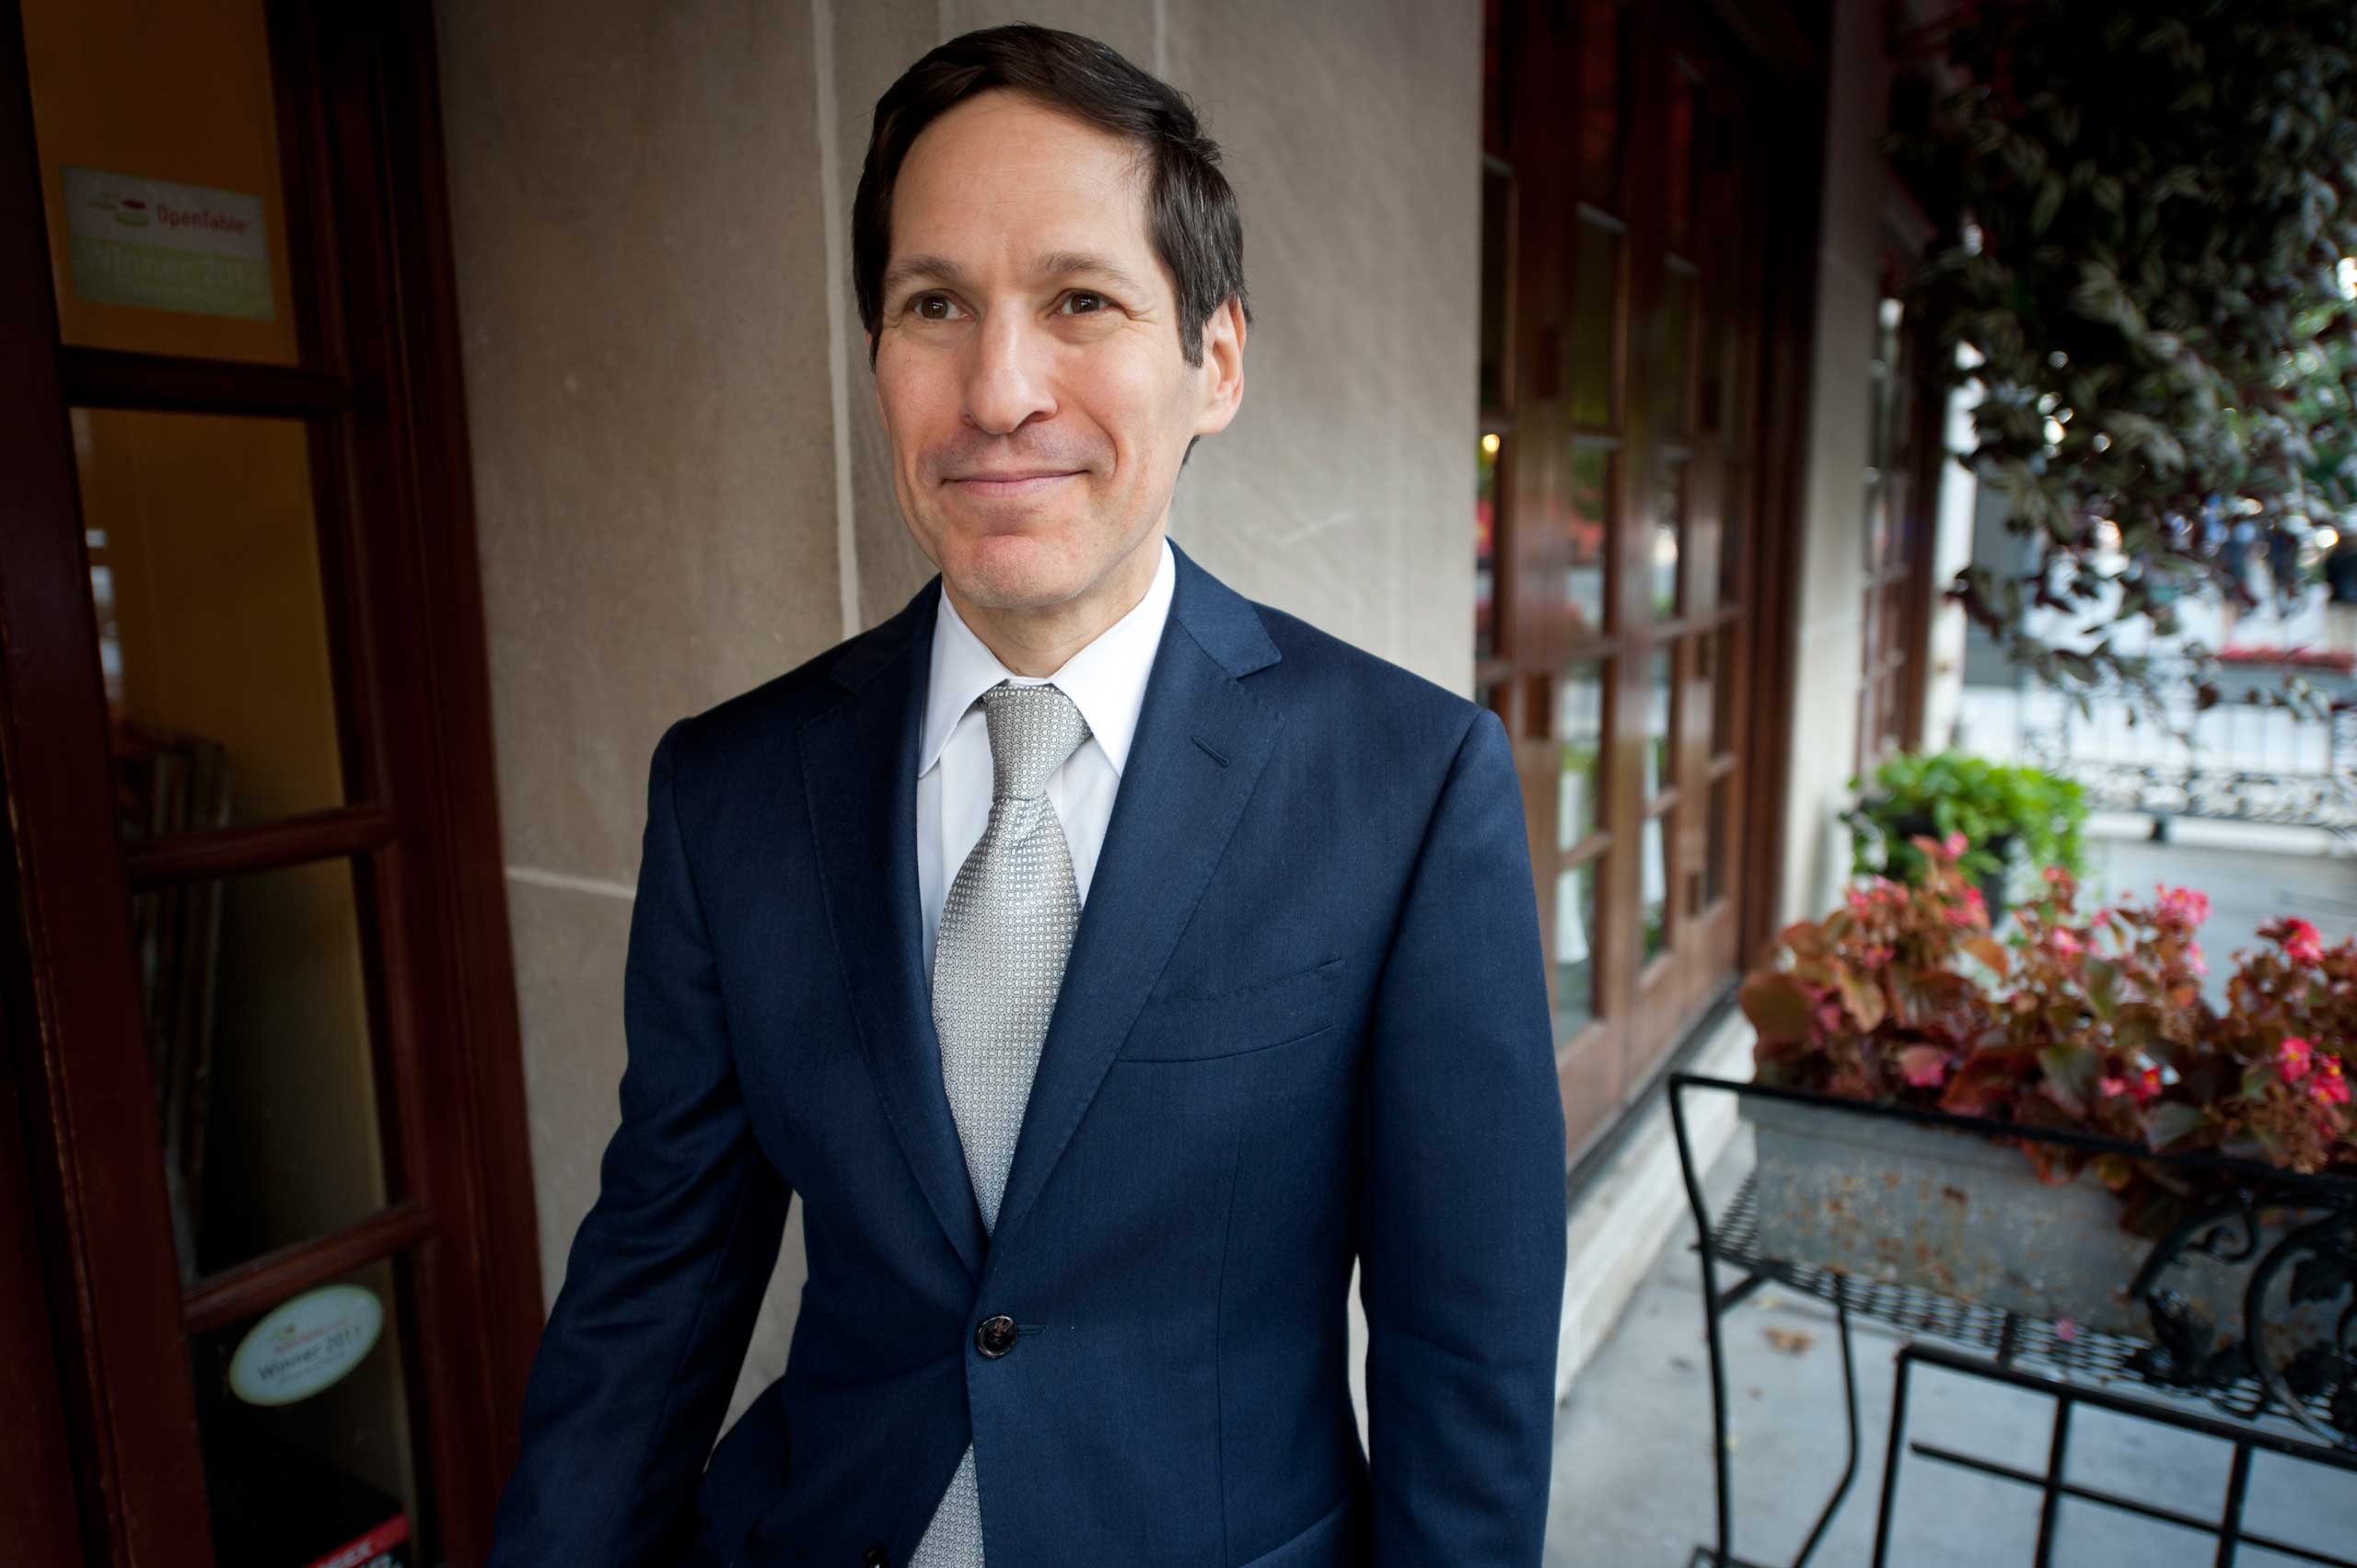 Centers for Disease Control and Prevention Director Tom Frieden poses for a photo in downtown Washington on Sept. 12, 2013. (Douglas Graham—CQ-Roll Call/Getty Images)